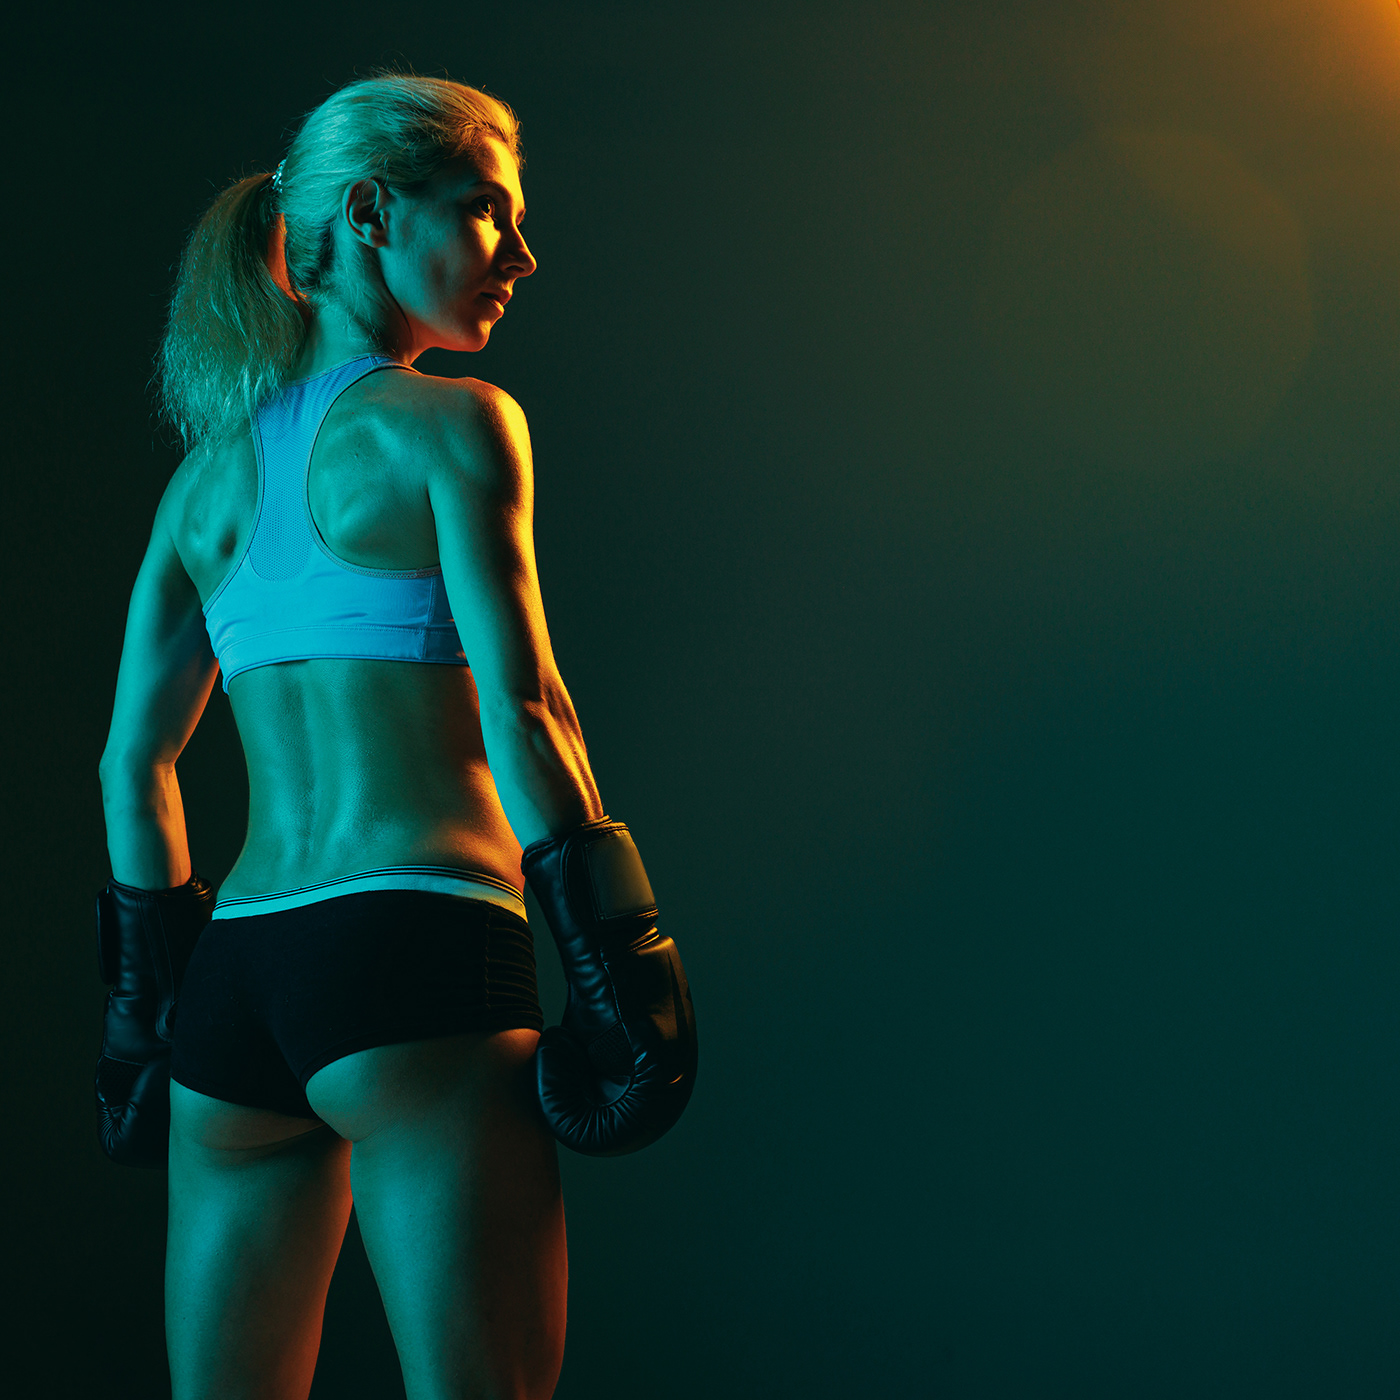 Boxing color fight girl kickboxing MMA neon poster sports UFC